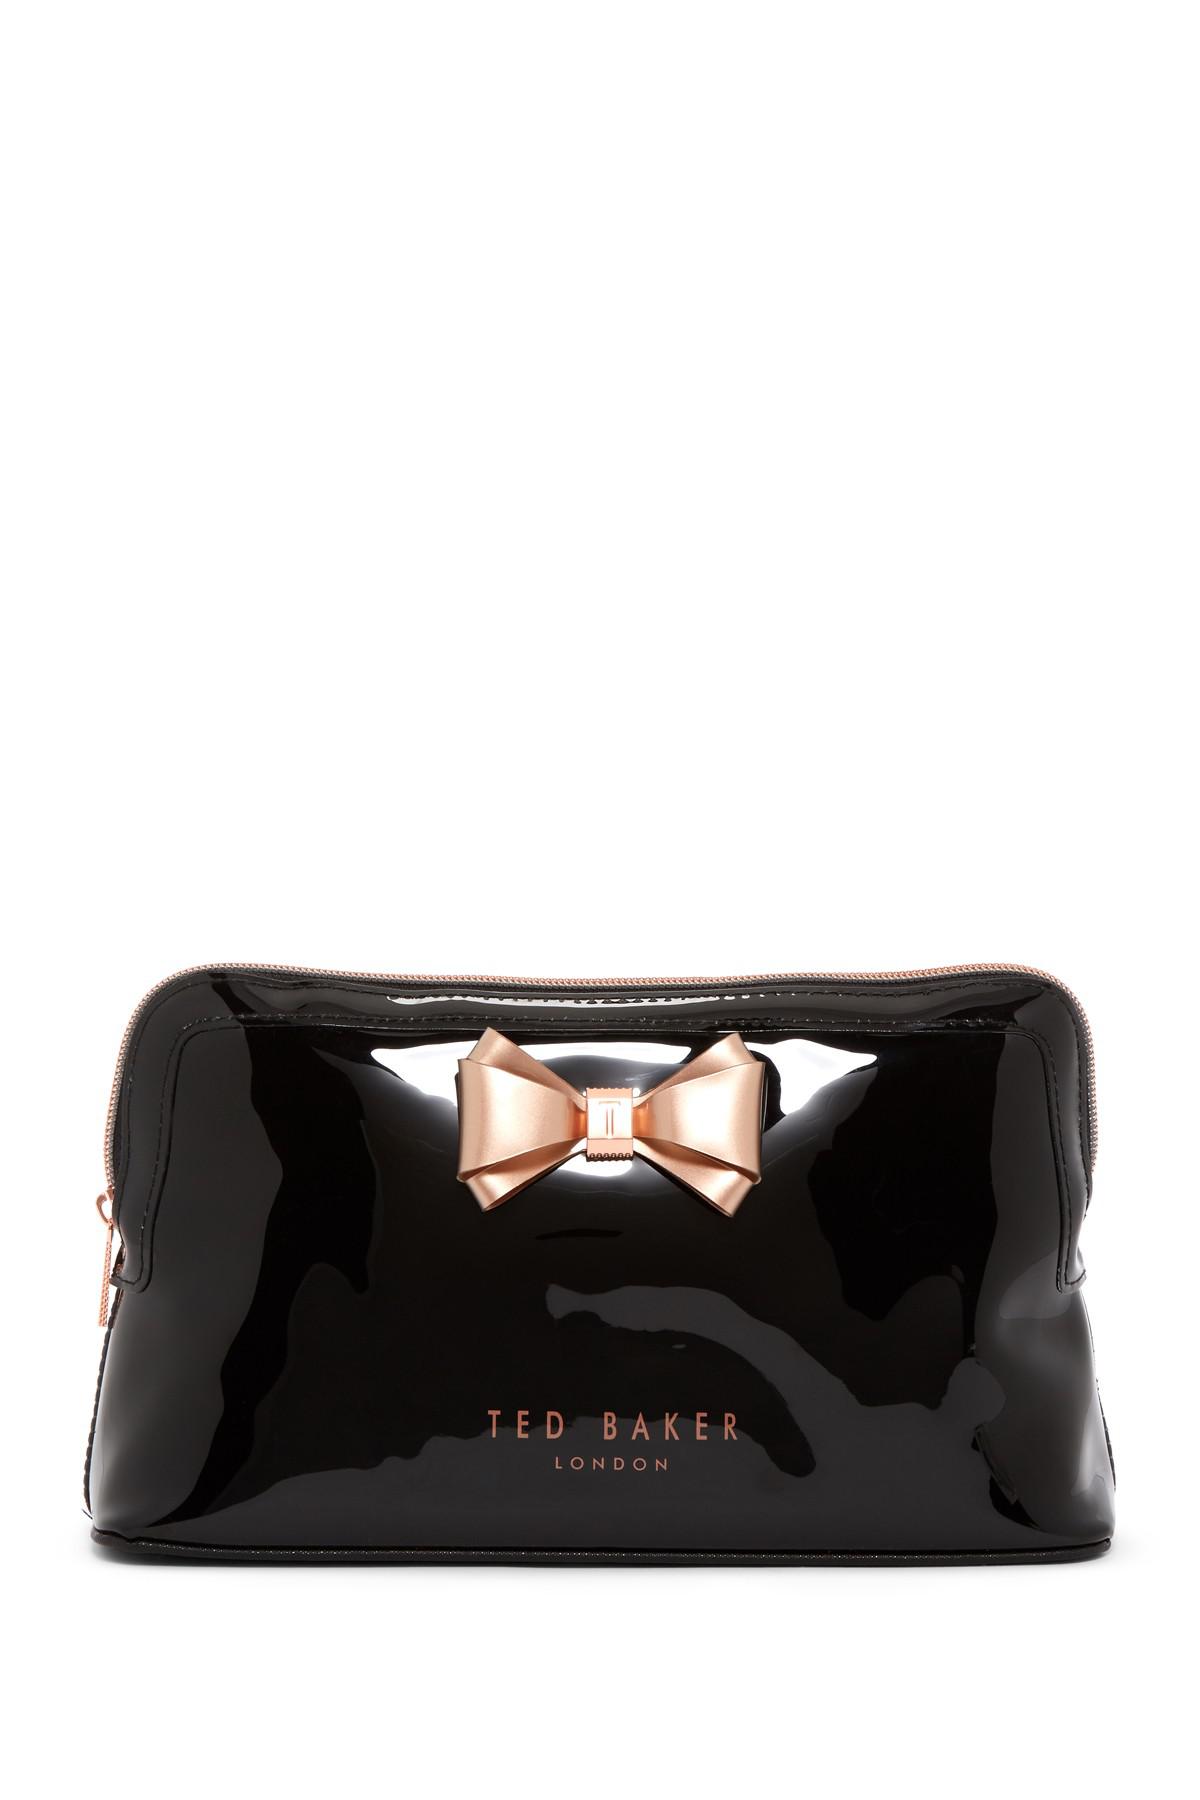 Ted Baker Abbie Curved Bow Large Wash Bag in Black - Lyst